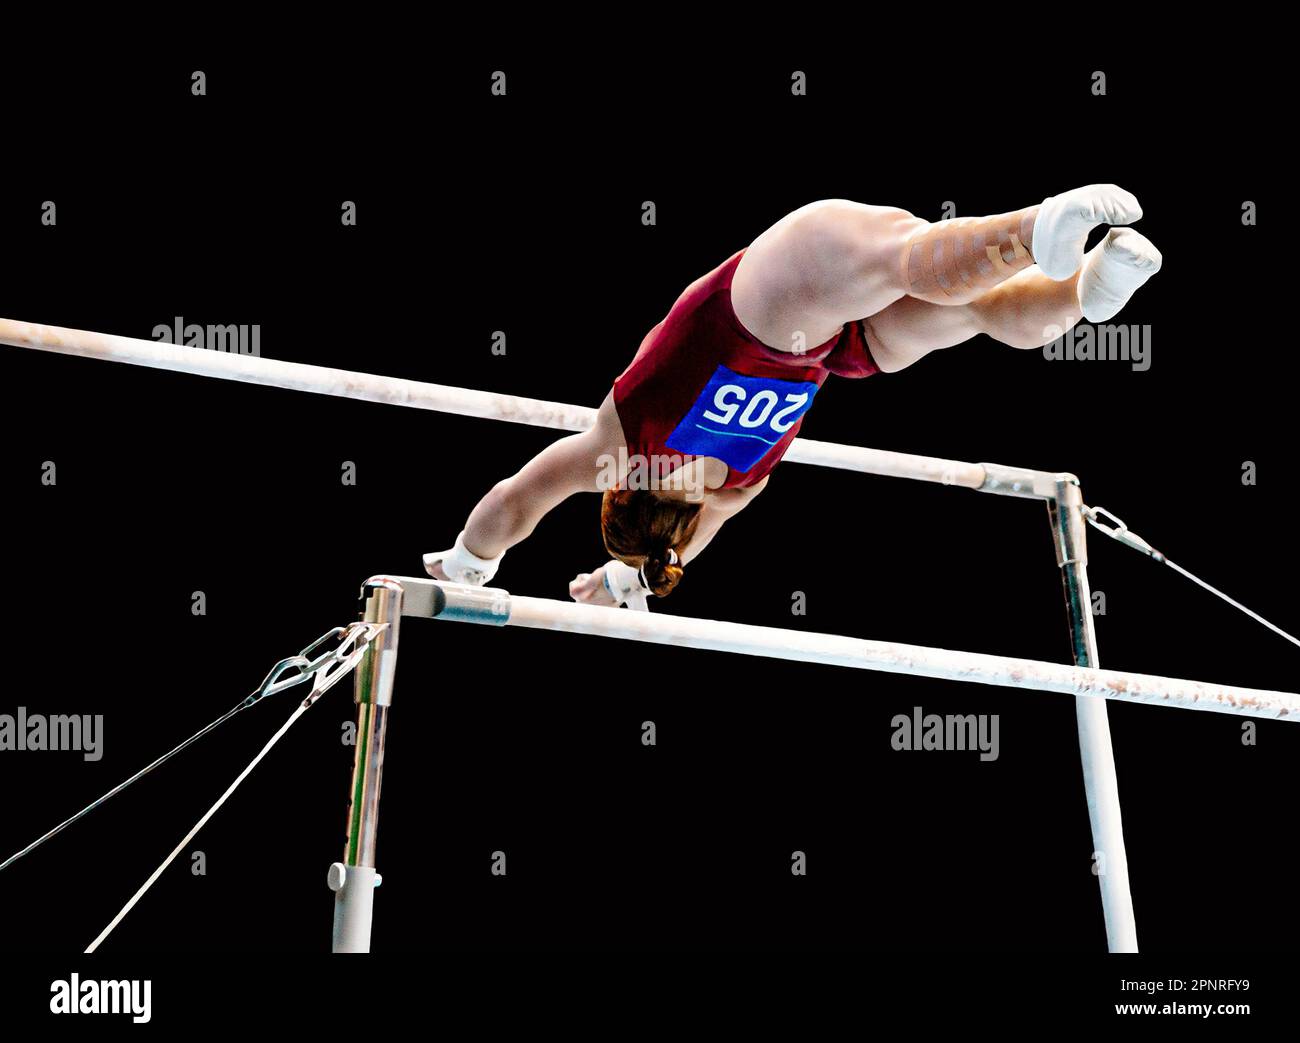 female gymnast exercise on uneven bars in gymnastics, black background, sports summer games Stock Photo